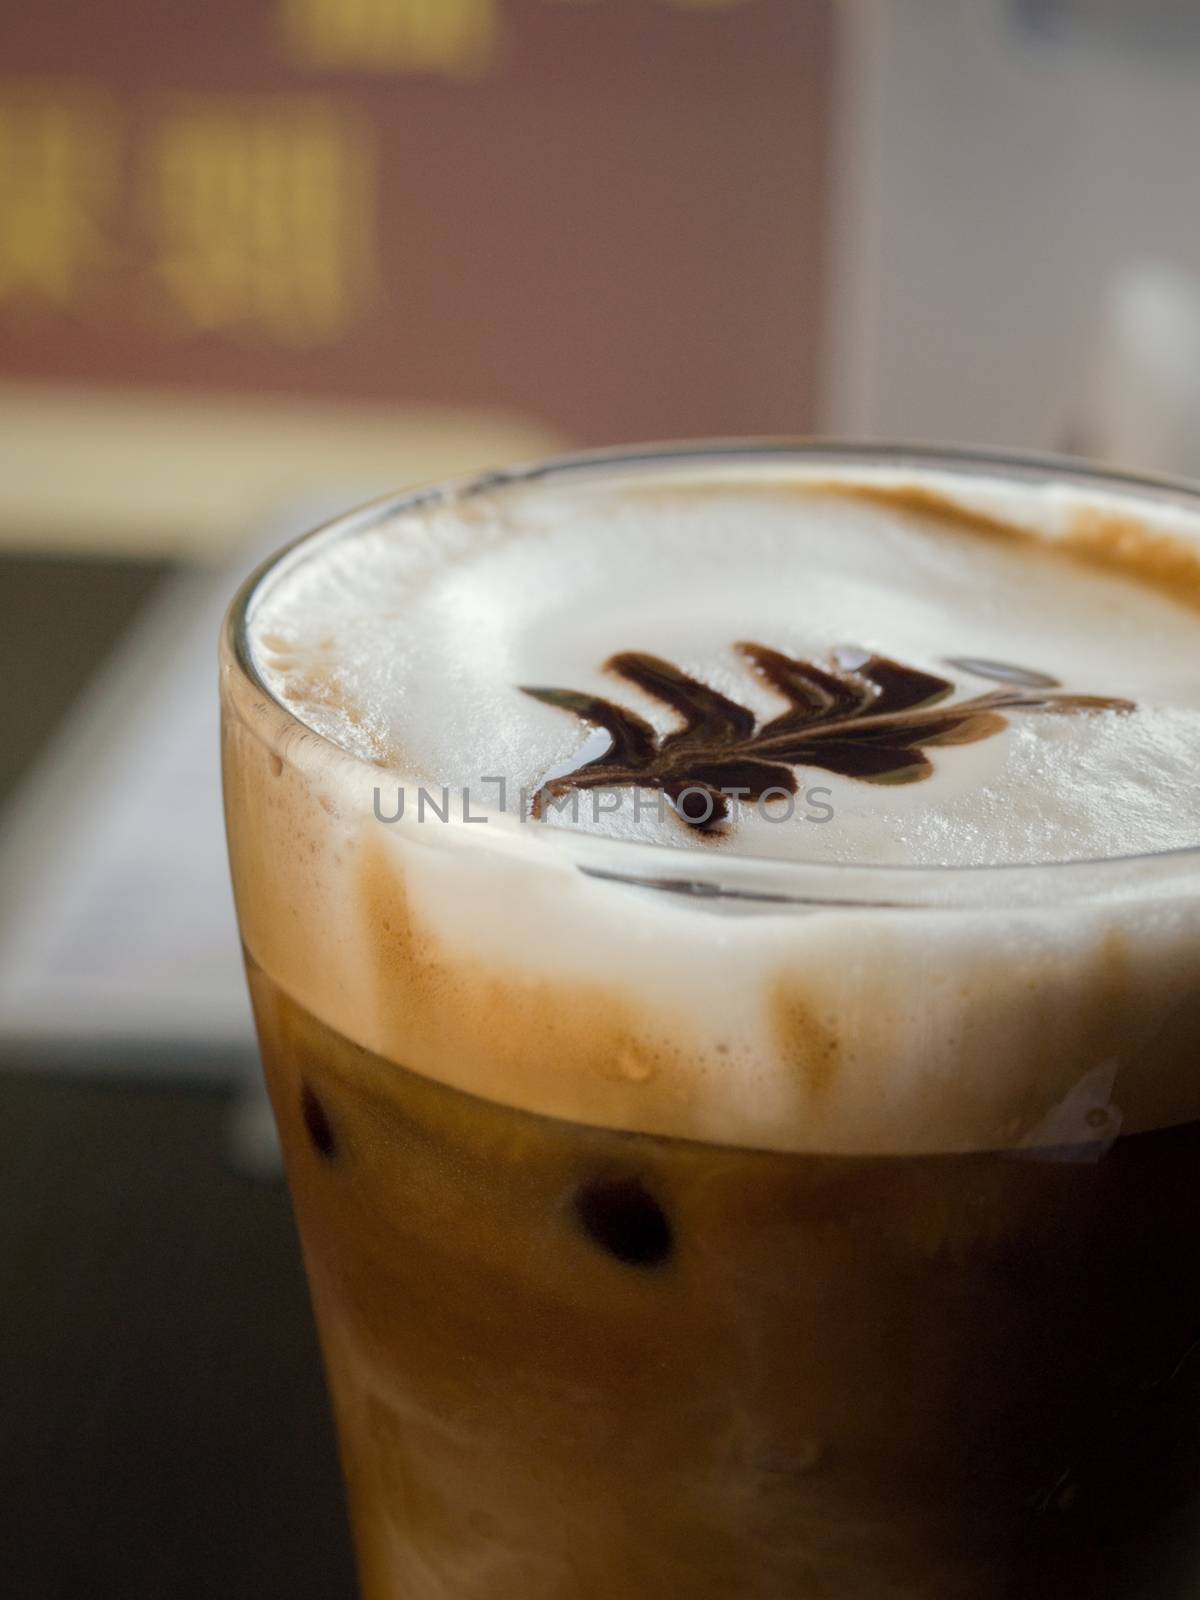 COLOR PHOTO OF ICED CAPPUCCINO WITH LATTE ART